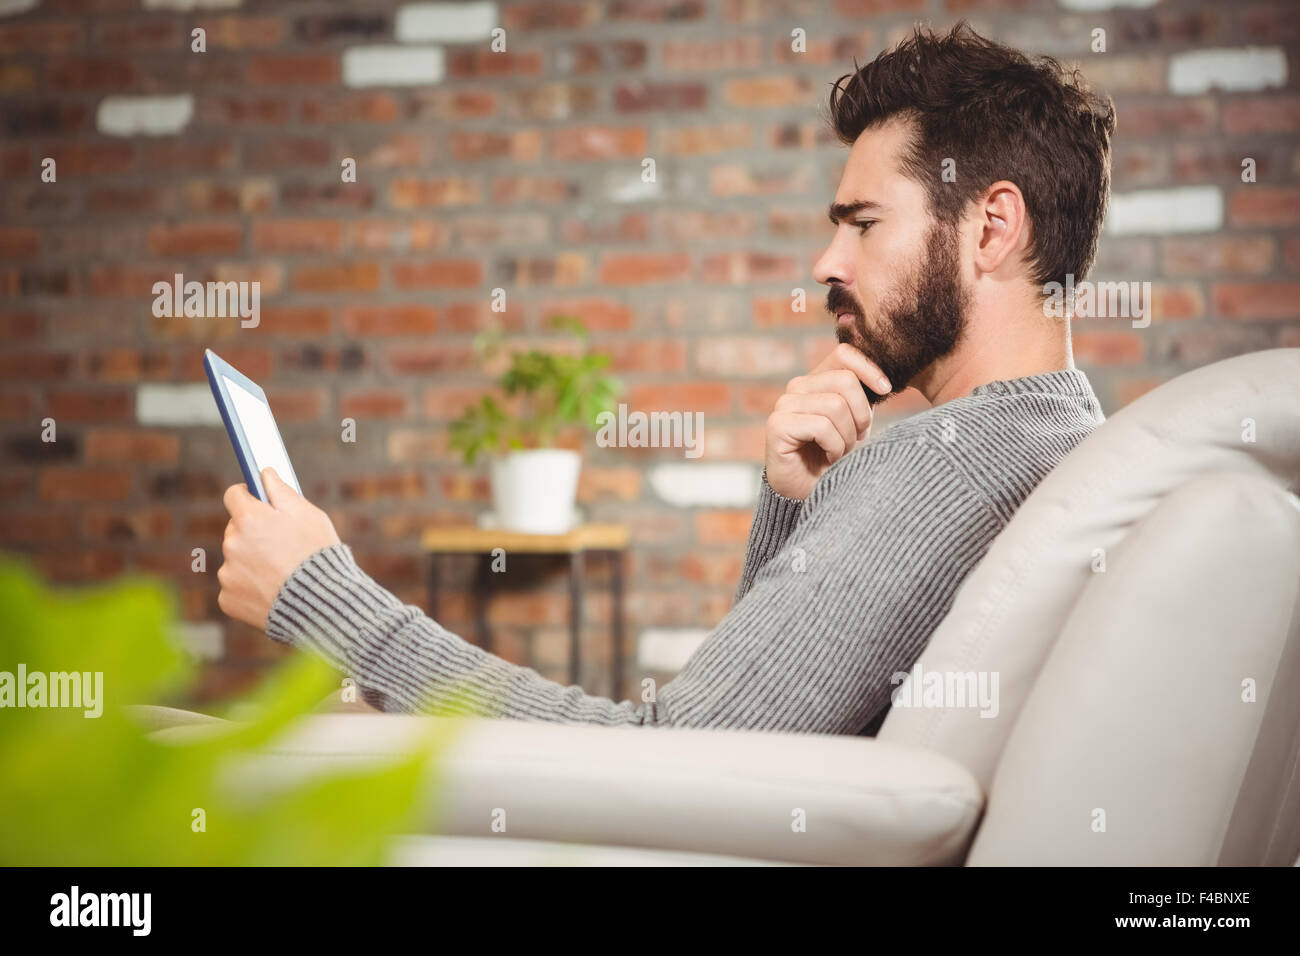 Side view of thoughtful man looking at digital tablet Stock Photo